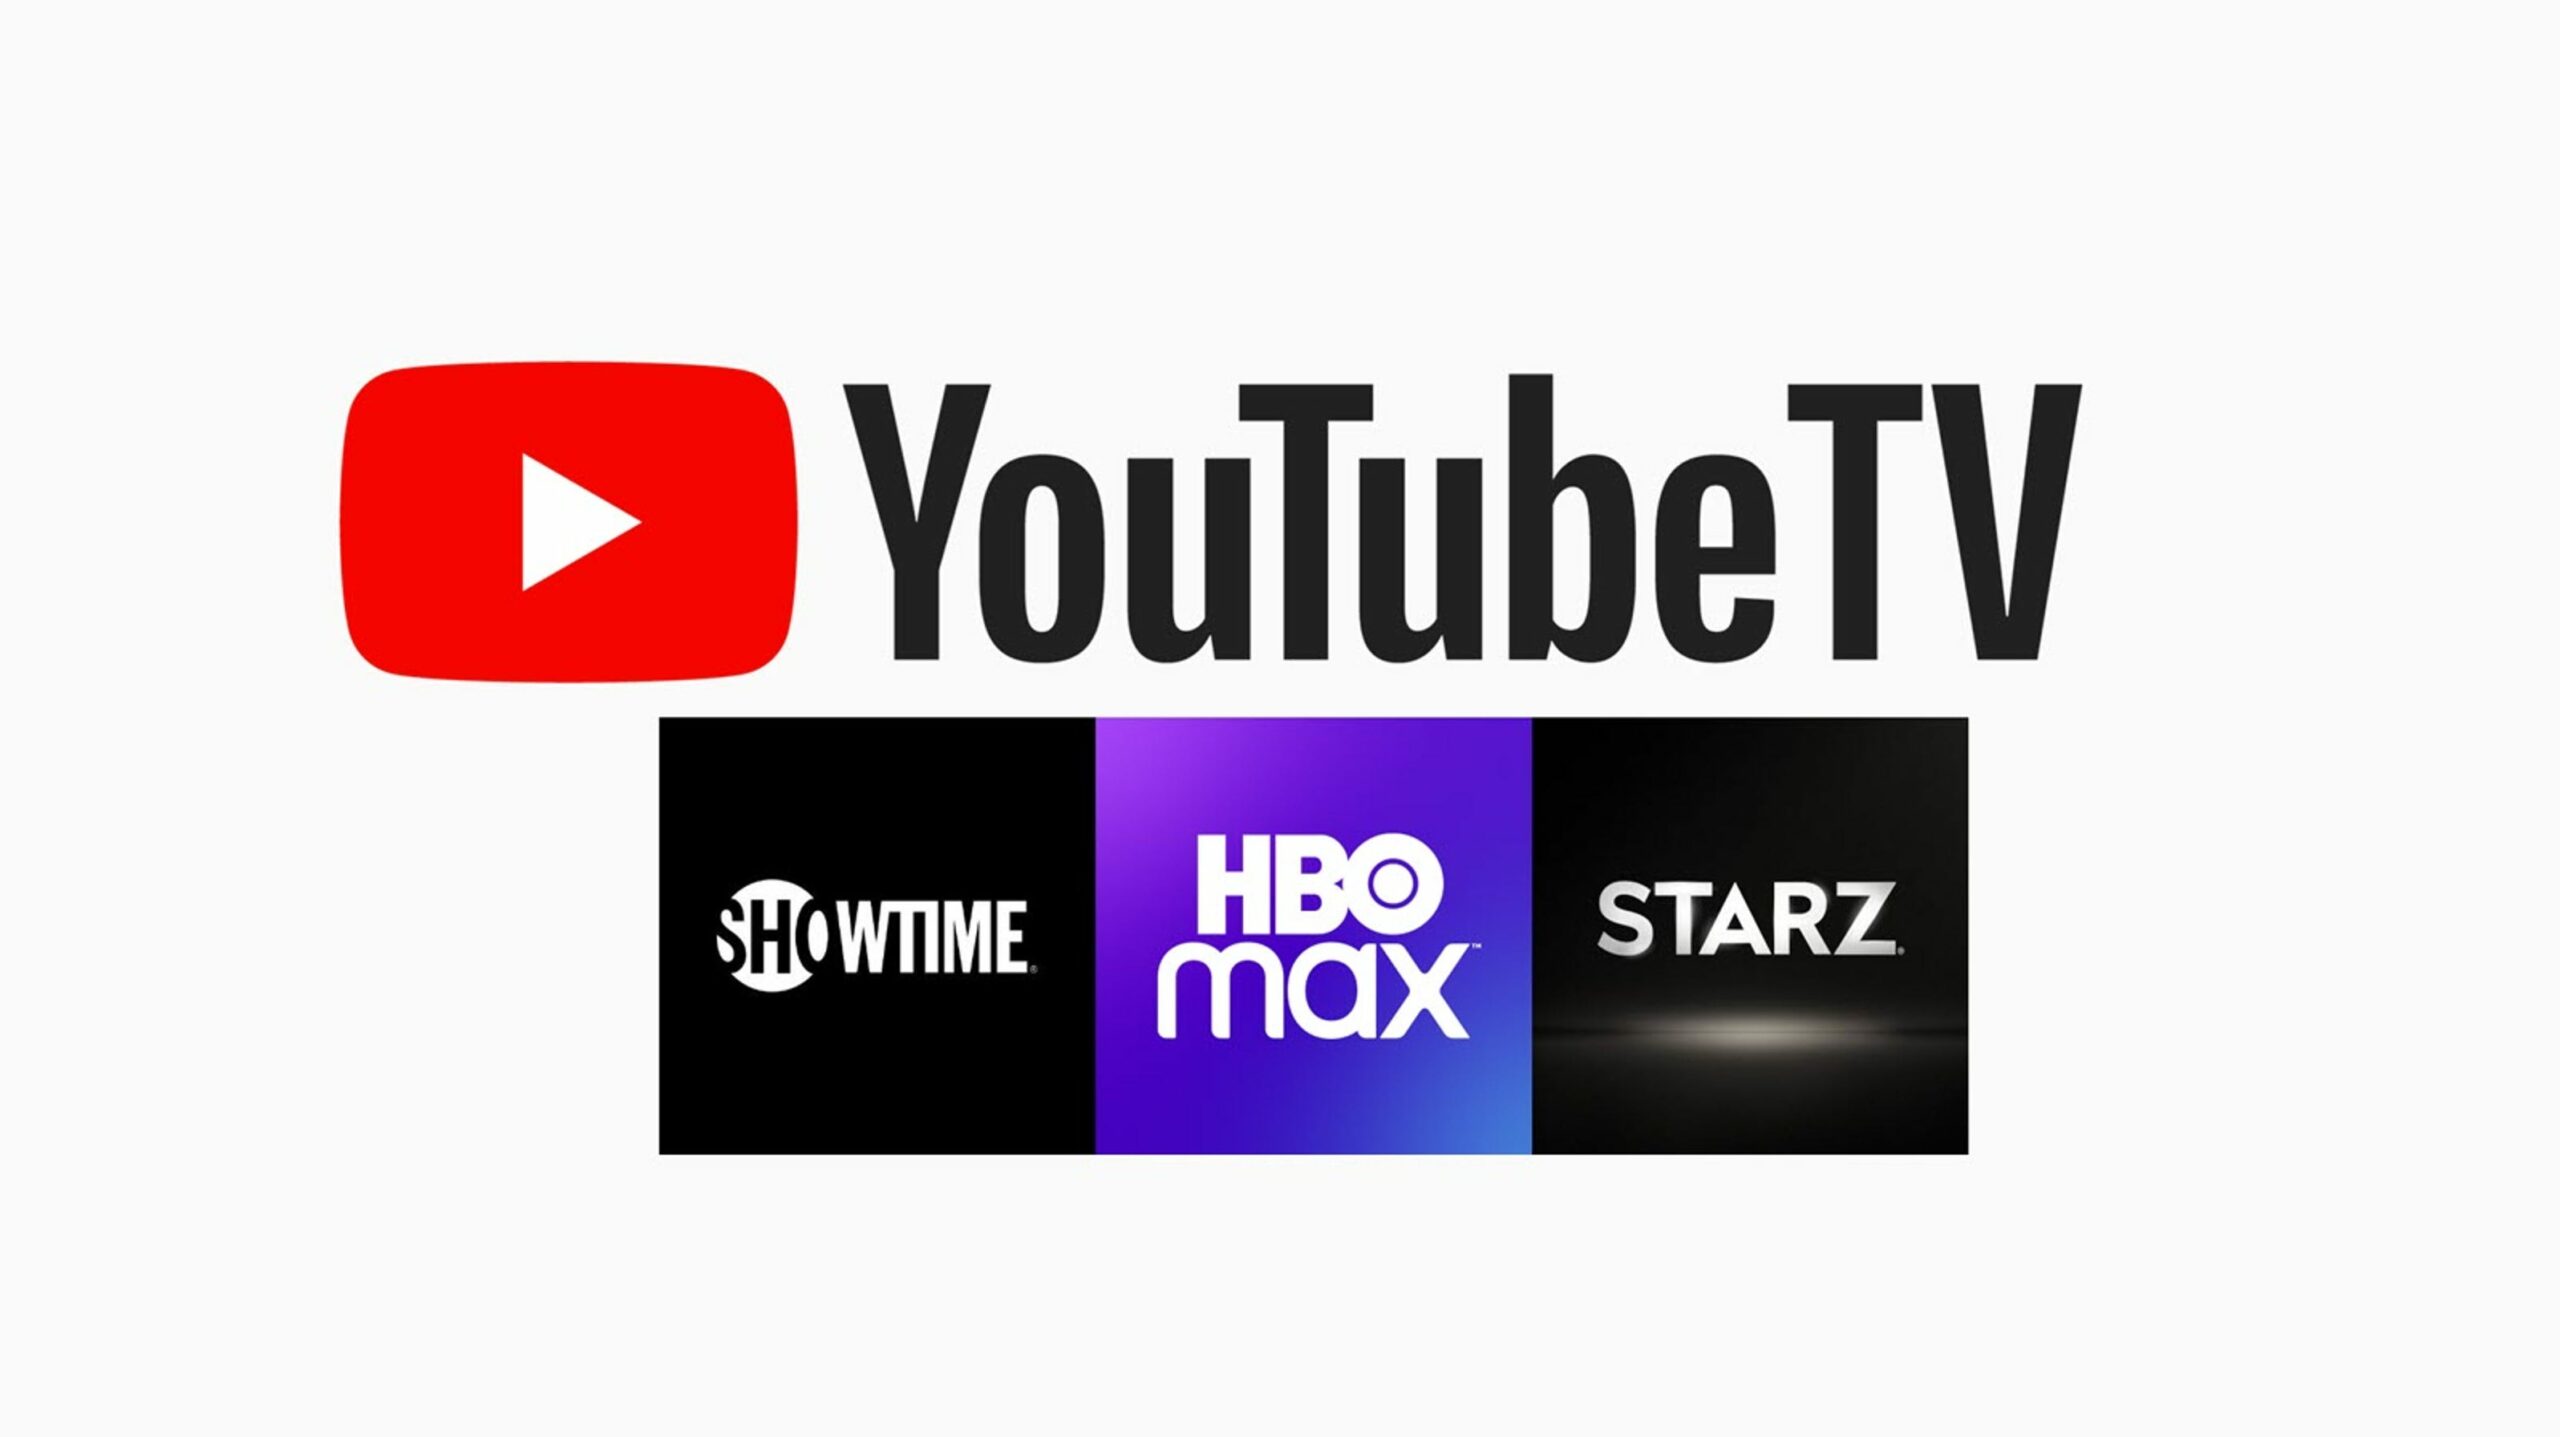 YouTube TV declares latest bundle that includes HBO Max, Showtime and Starz